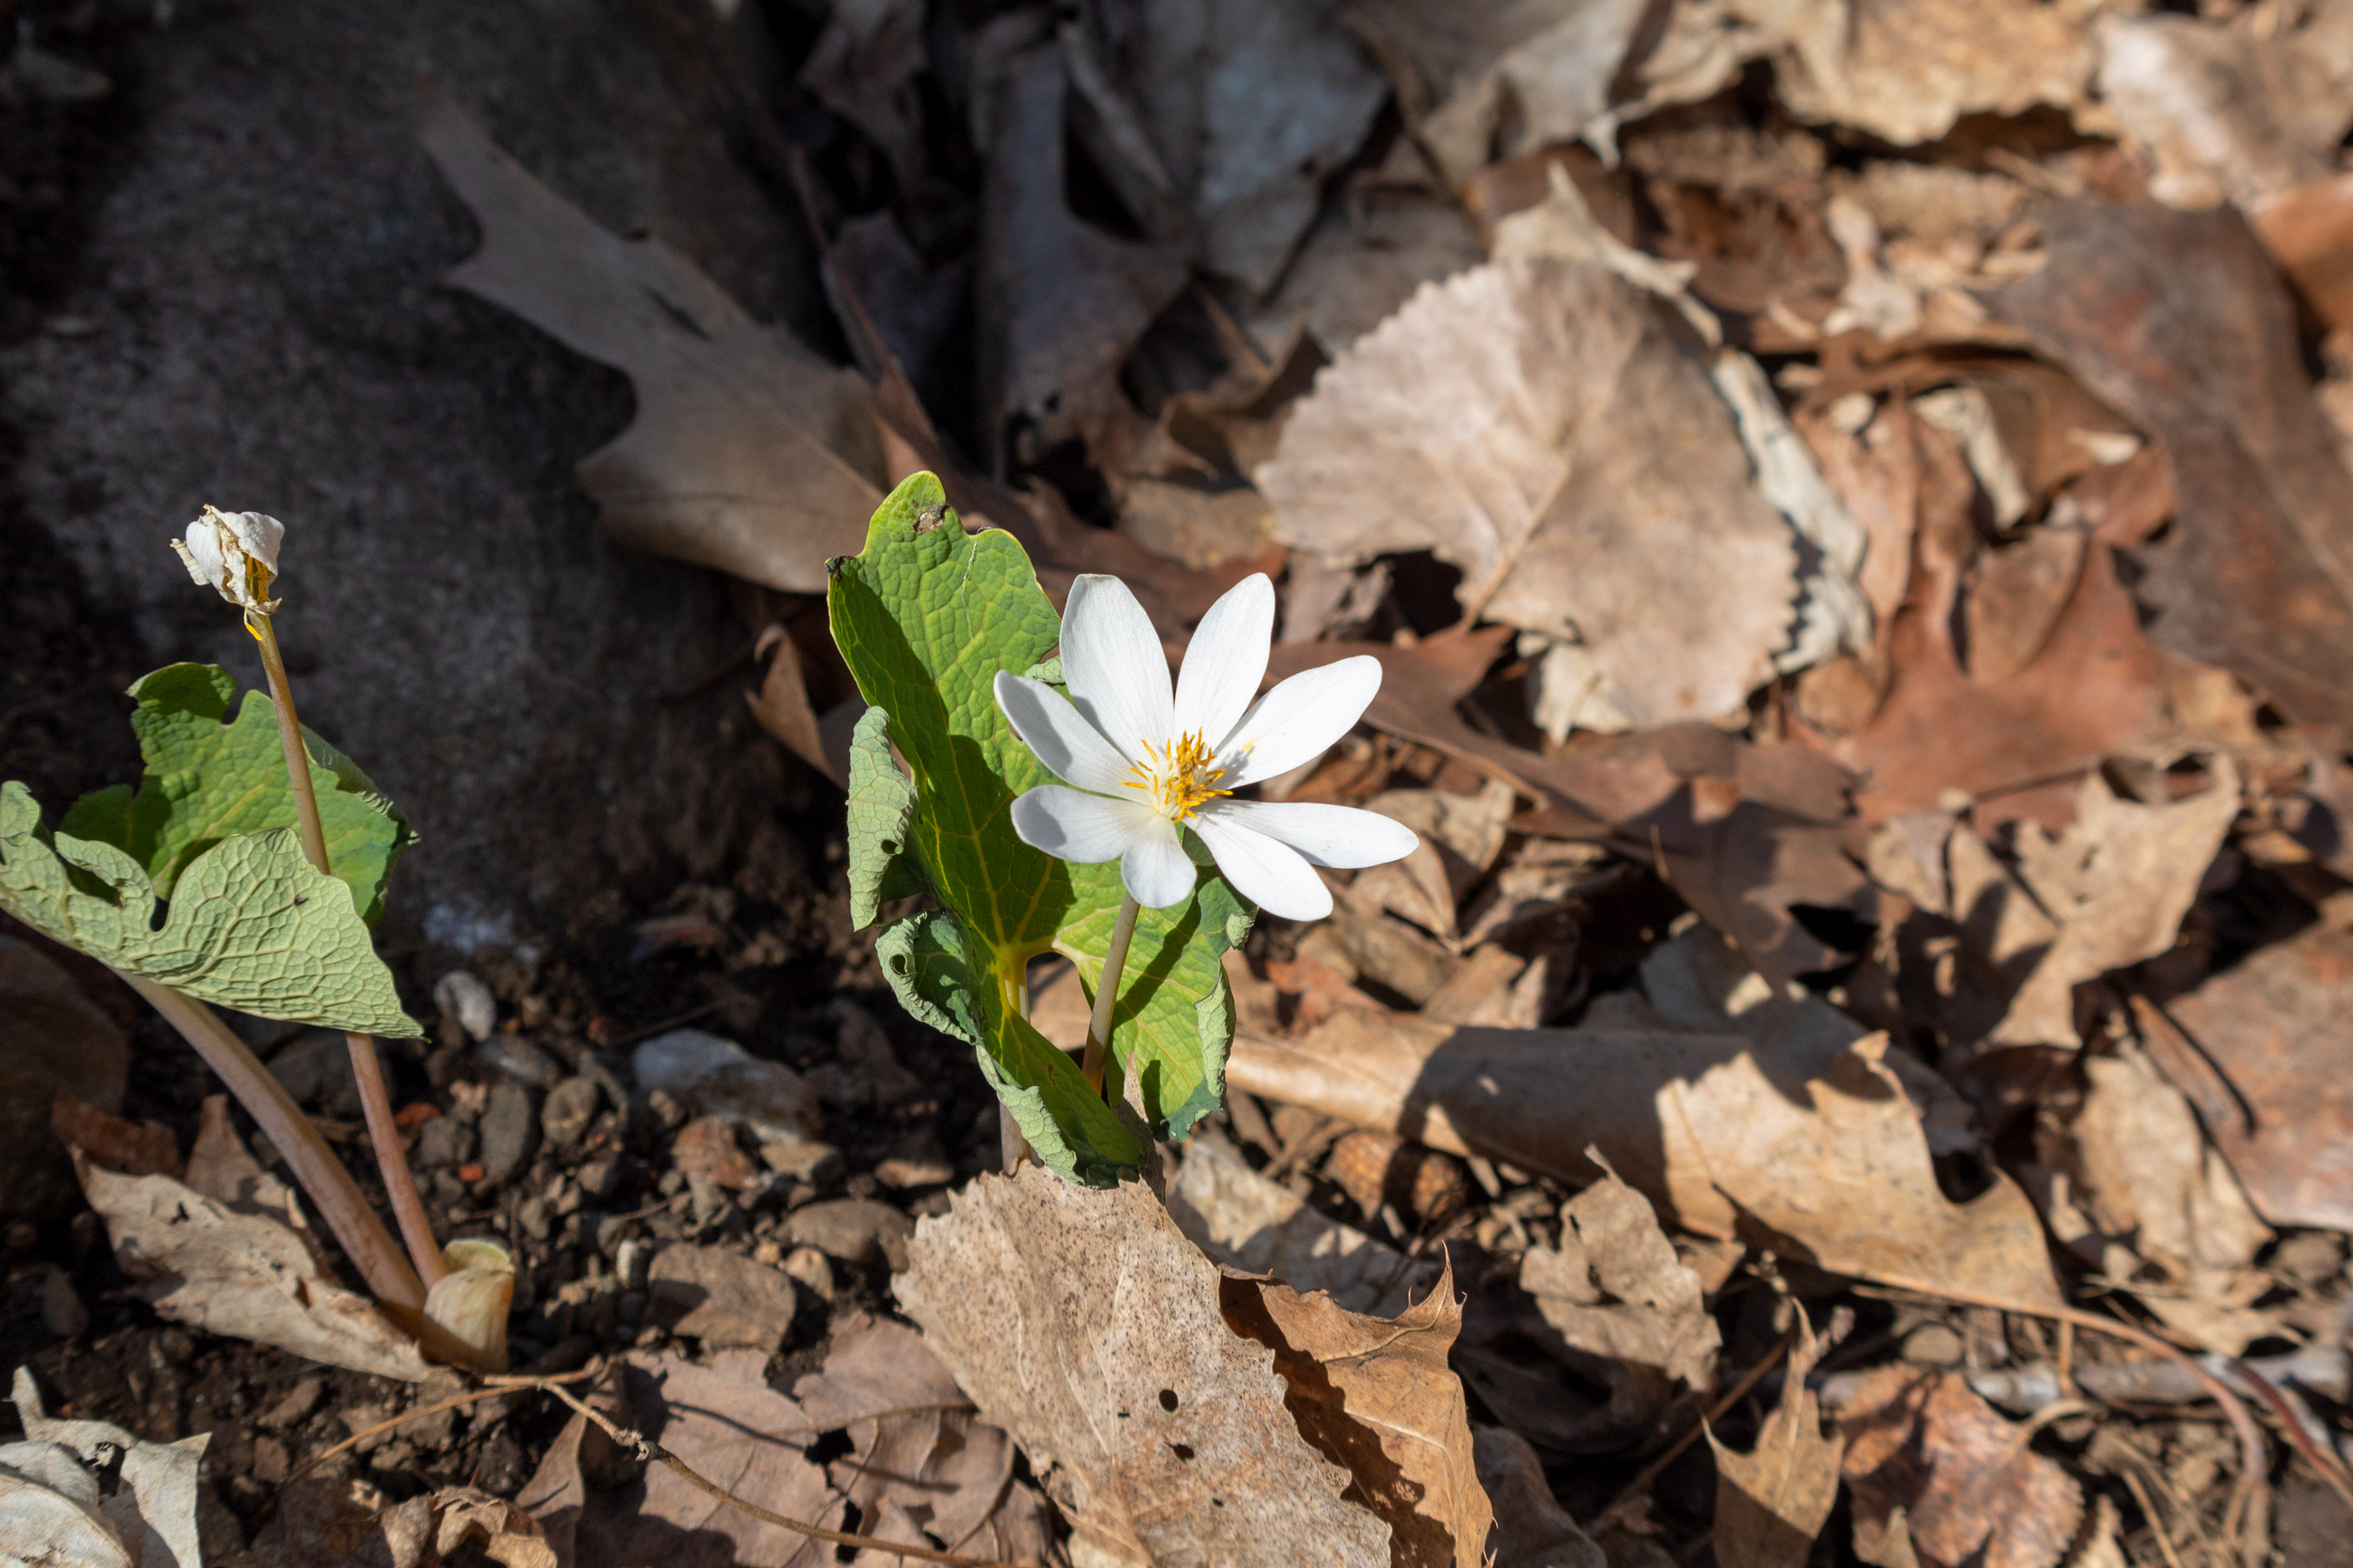 White flower with a single large green leaf growing on a leafy forest floor